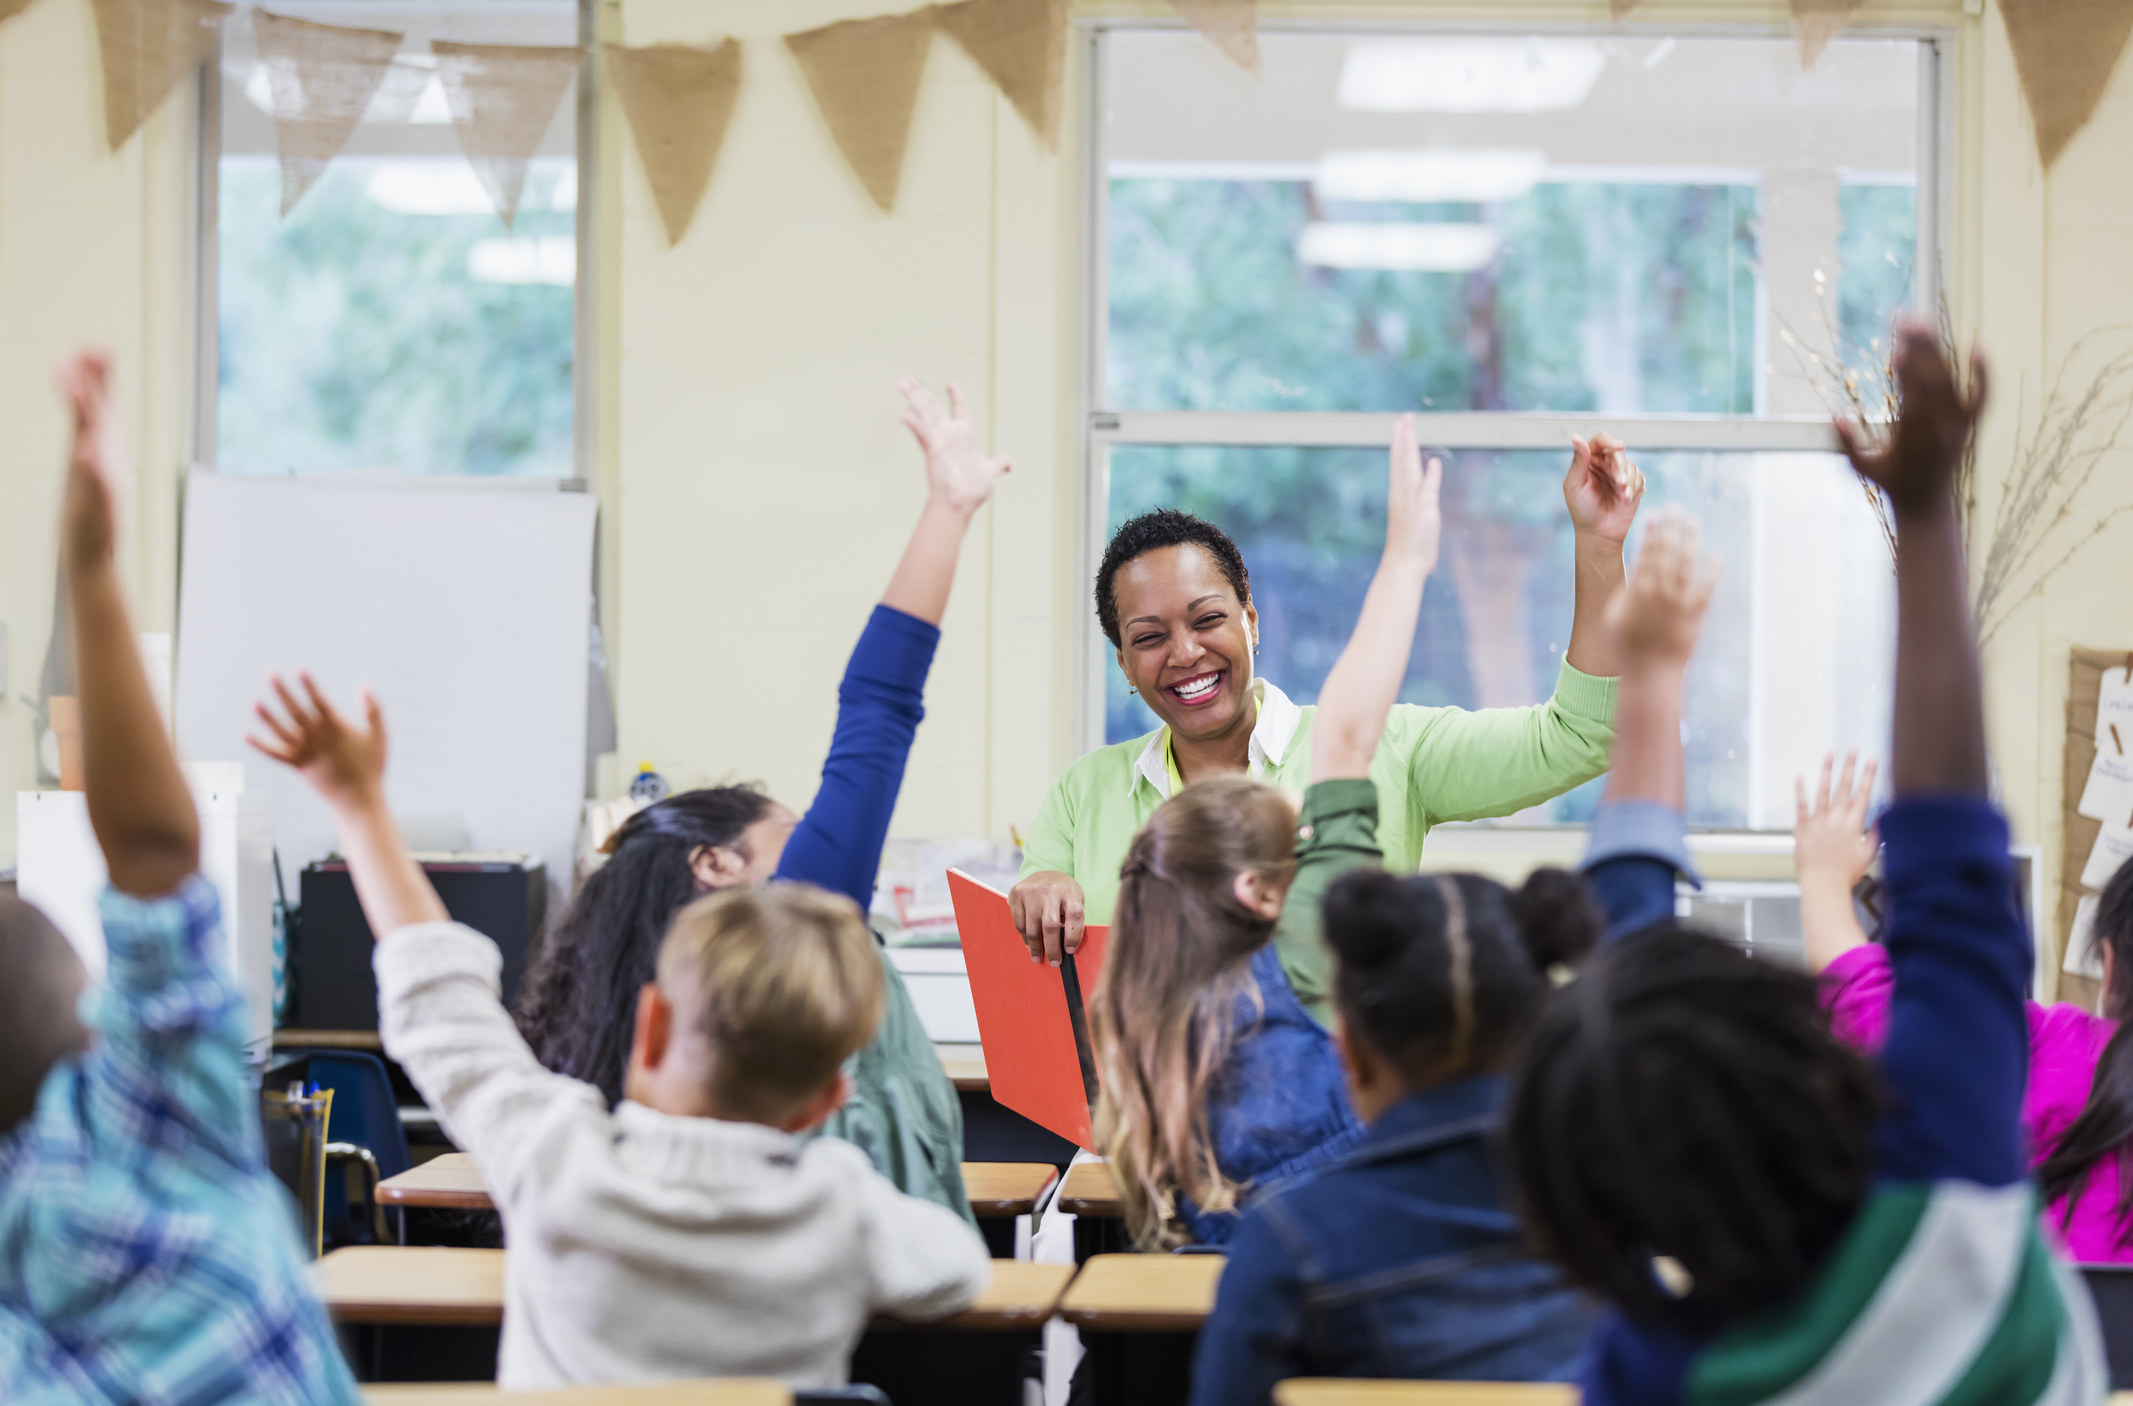 A stock image of a teacher smiling as she and her students wave their hands